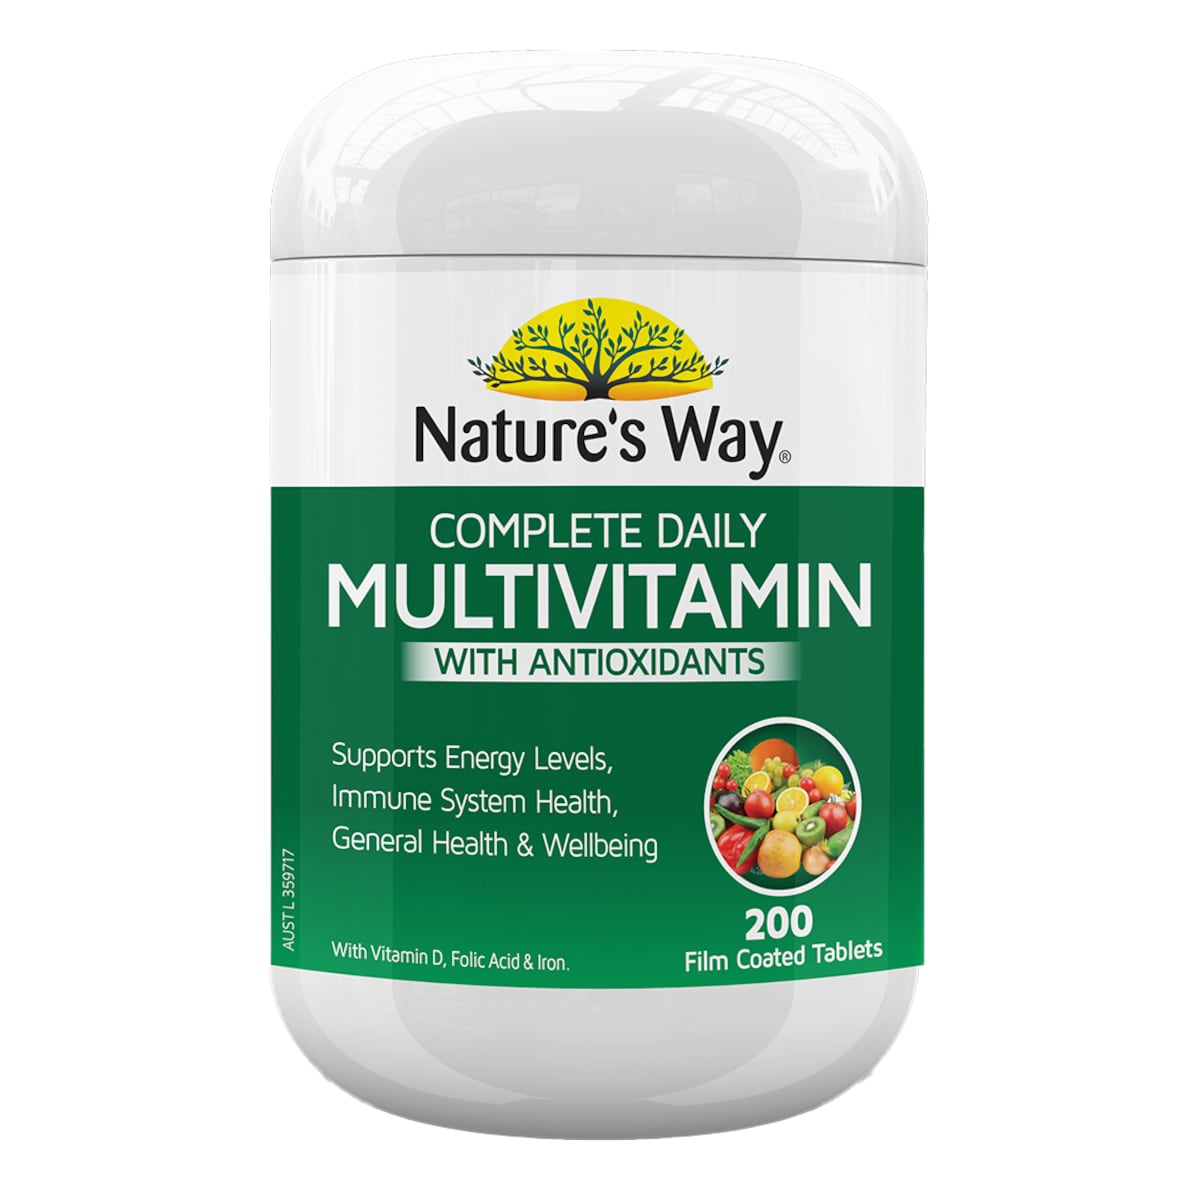 Natures Way Complete Daily Multivitamin with Antioxidants 200 Tablets (New)